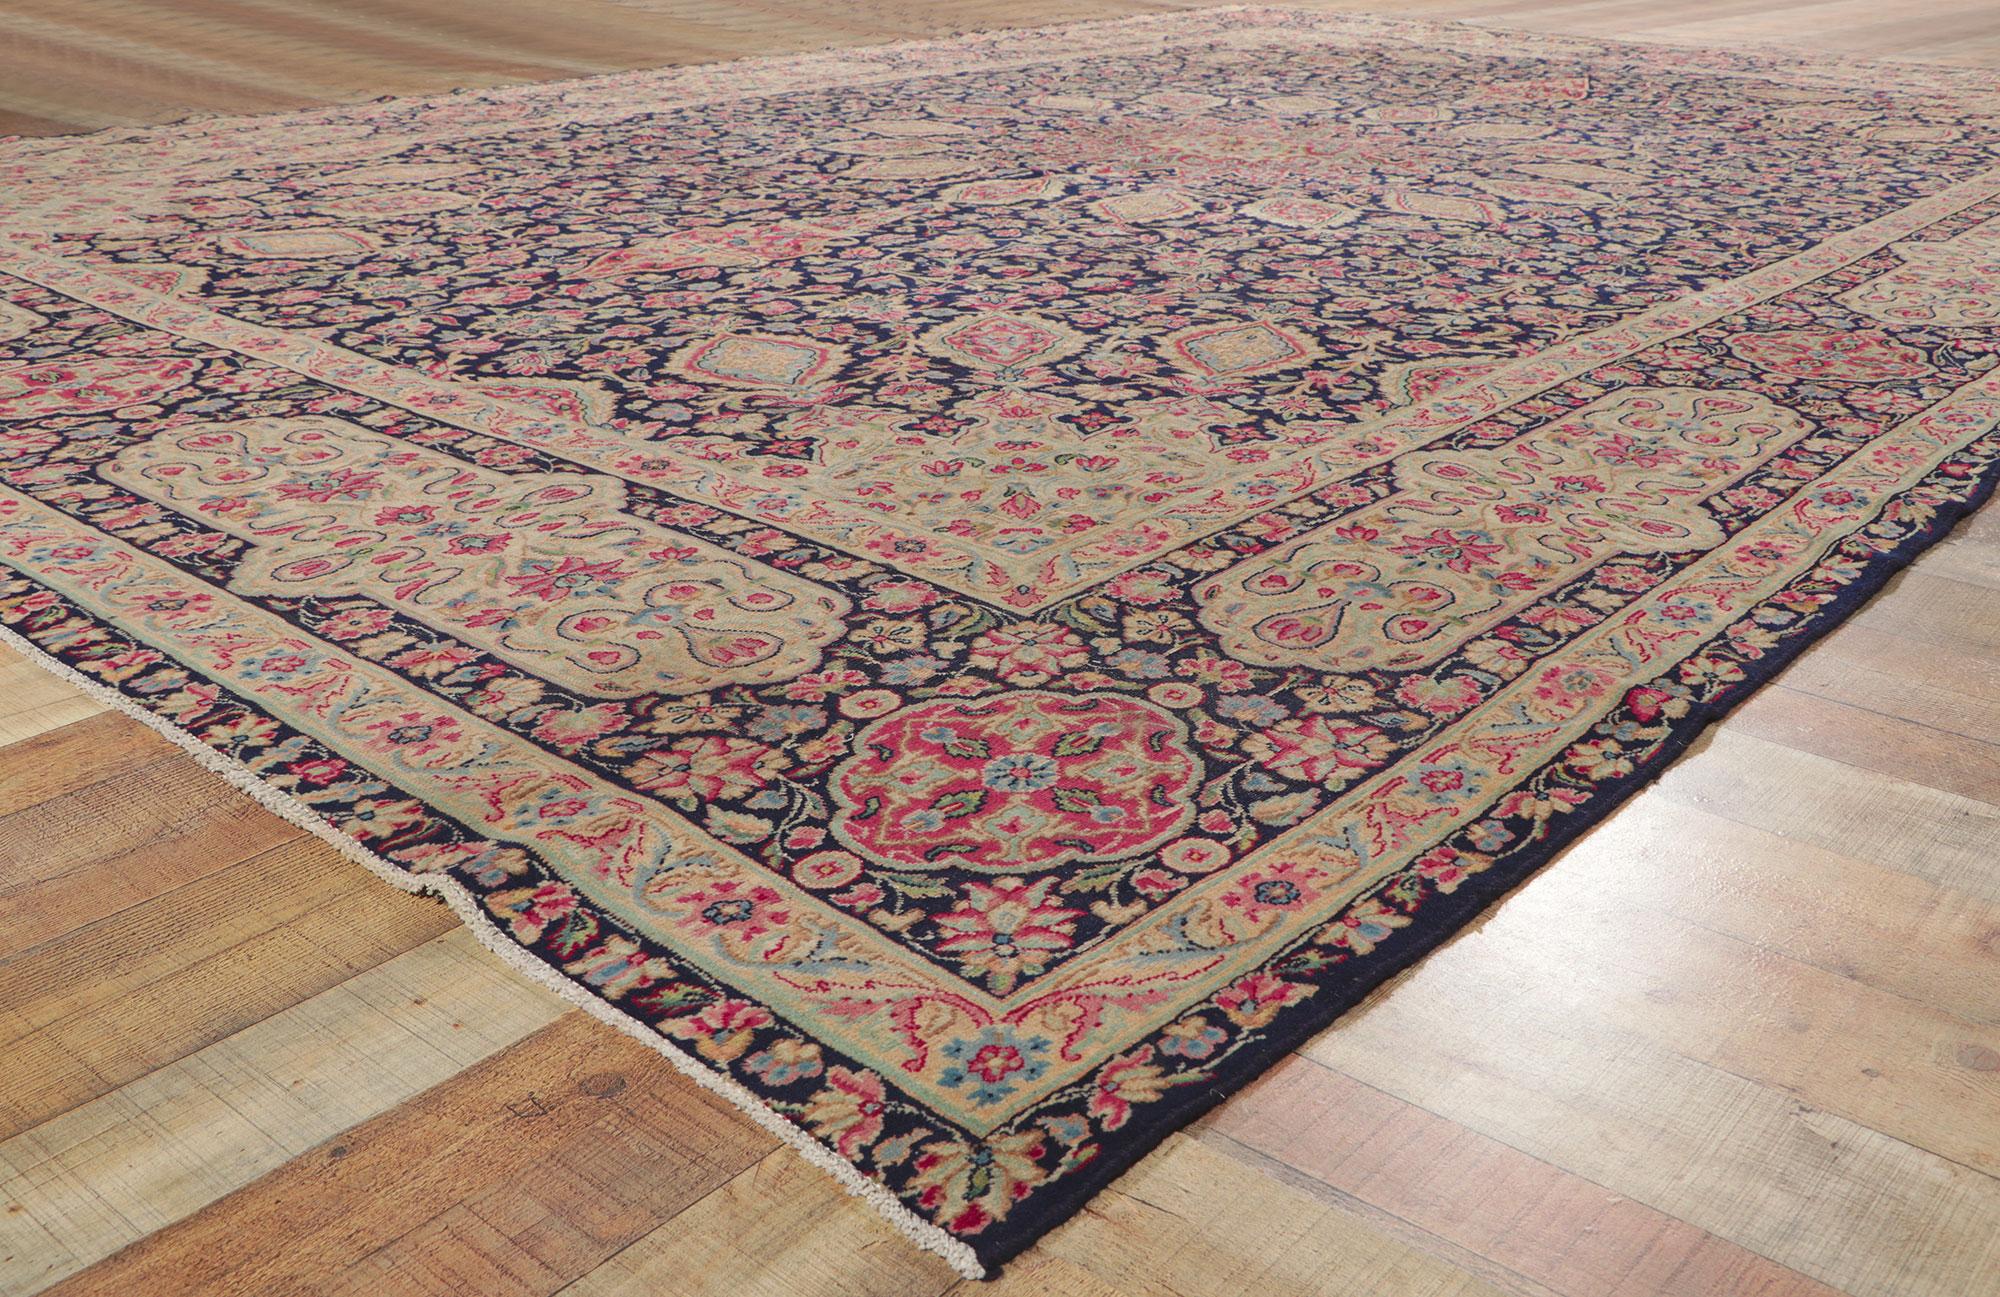 Wool Antique Persian Kerman Rug with The Ardabil Carpet Design For Sale